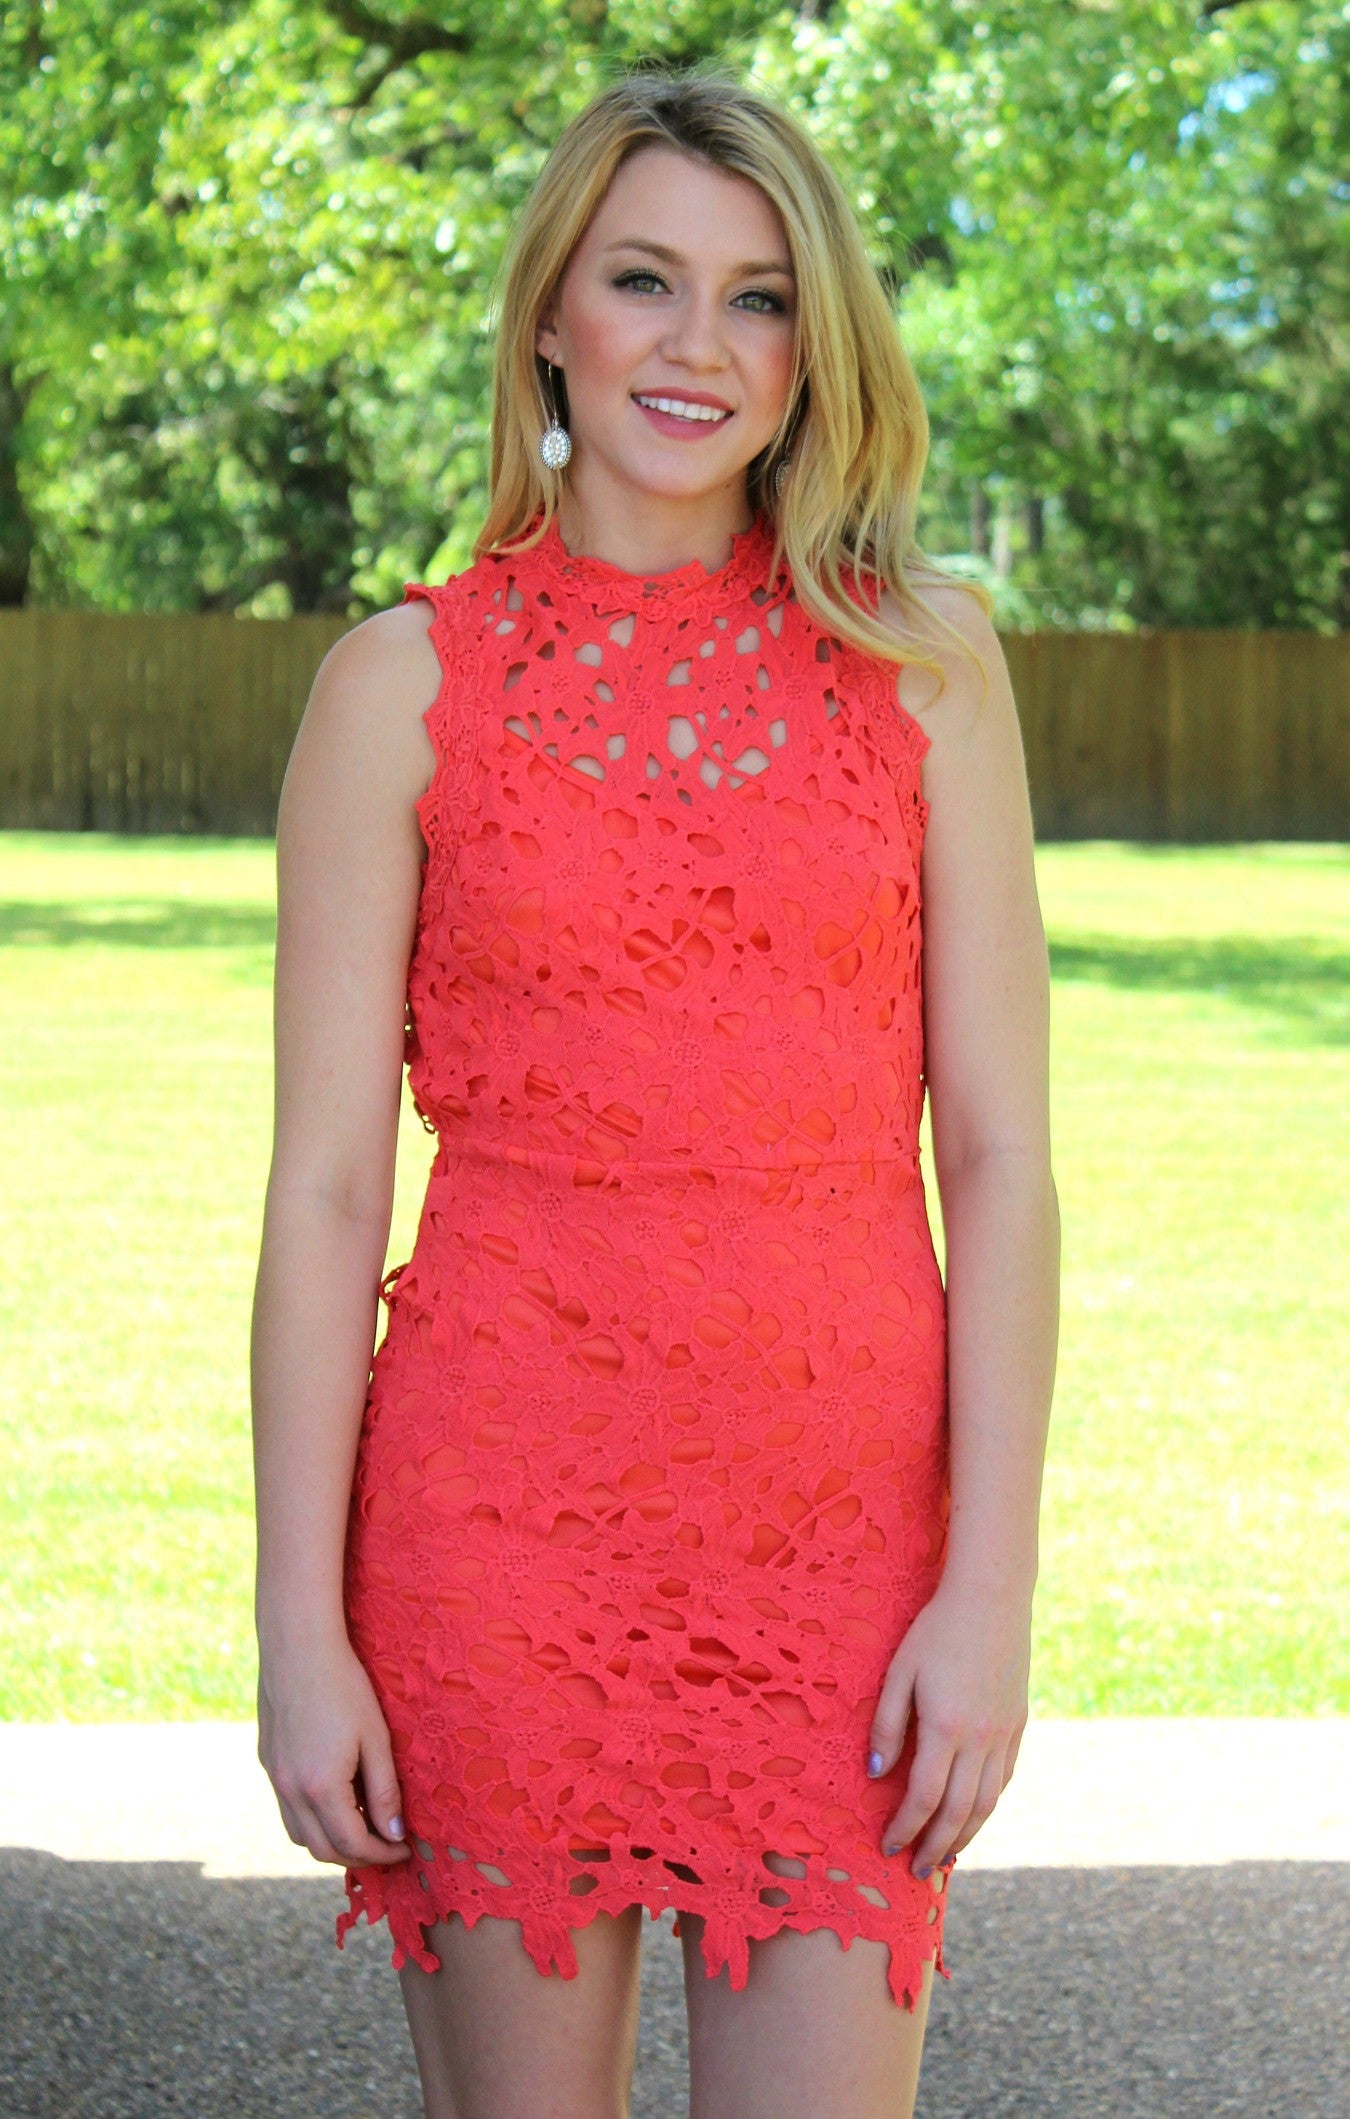 Last Chance Size Large | Quick To Stare Crochet Dress in Coral - Giddy Up Glamour Boutique